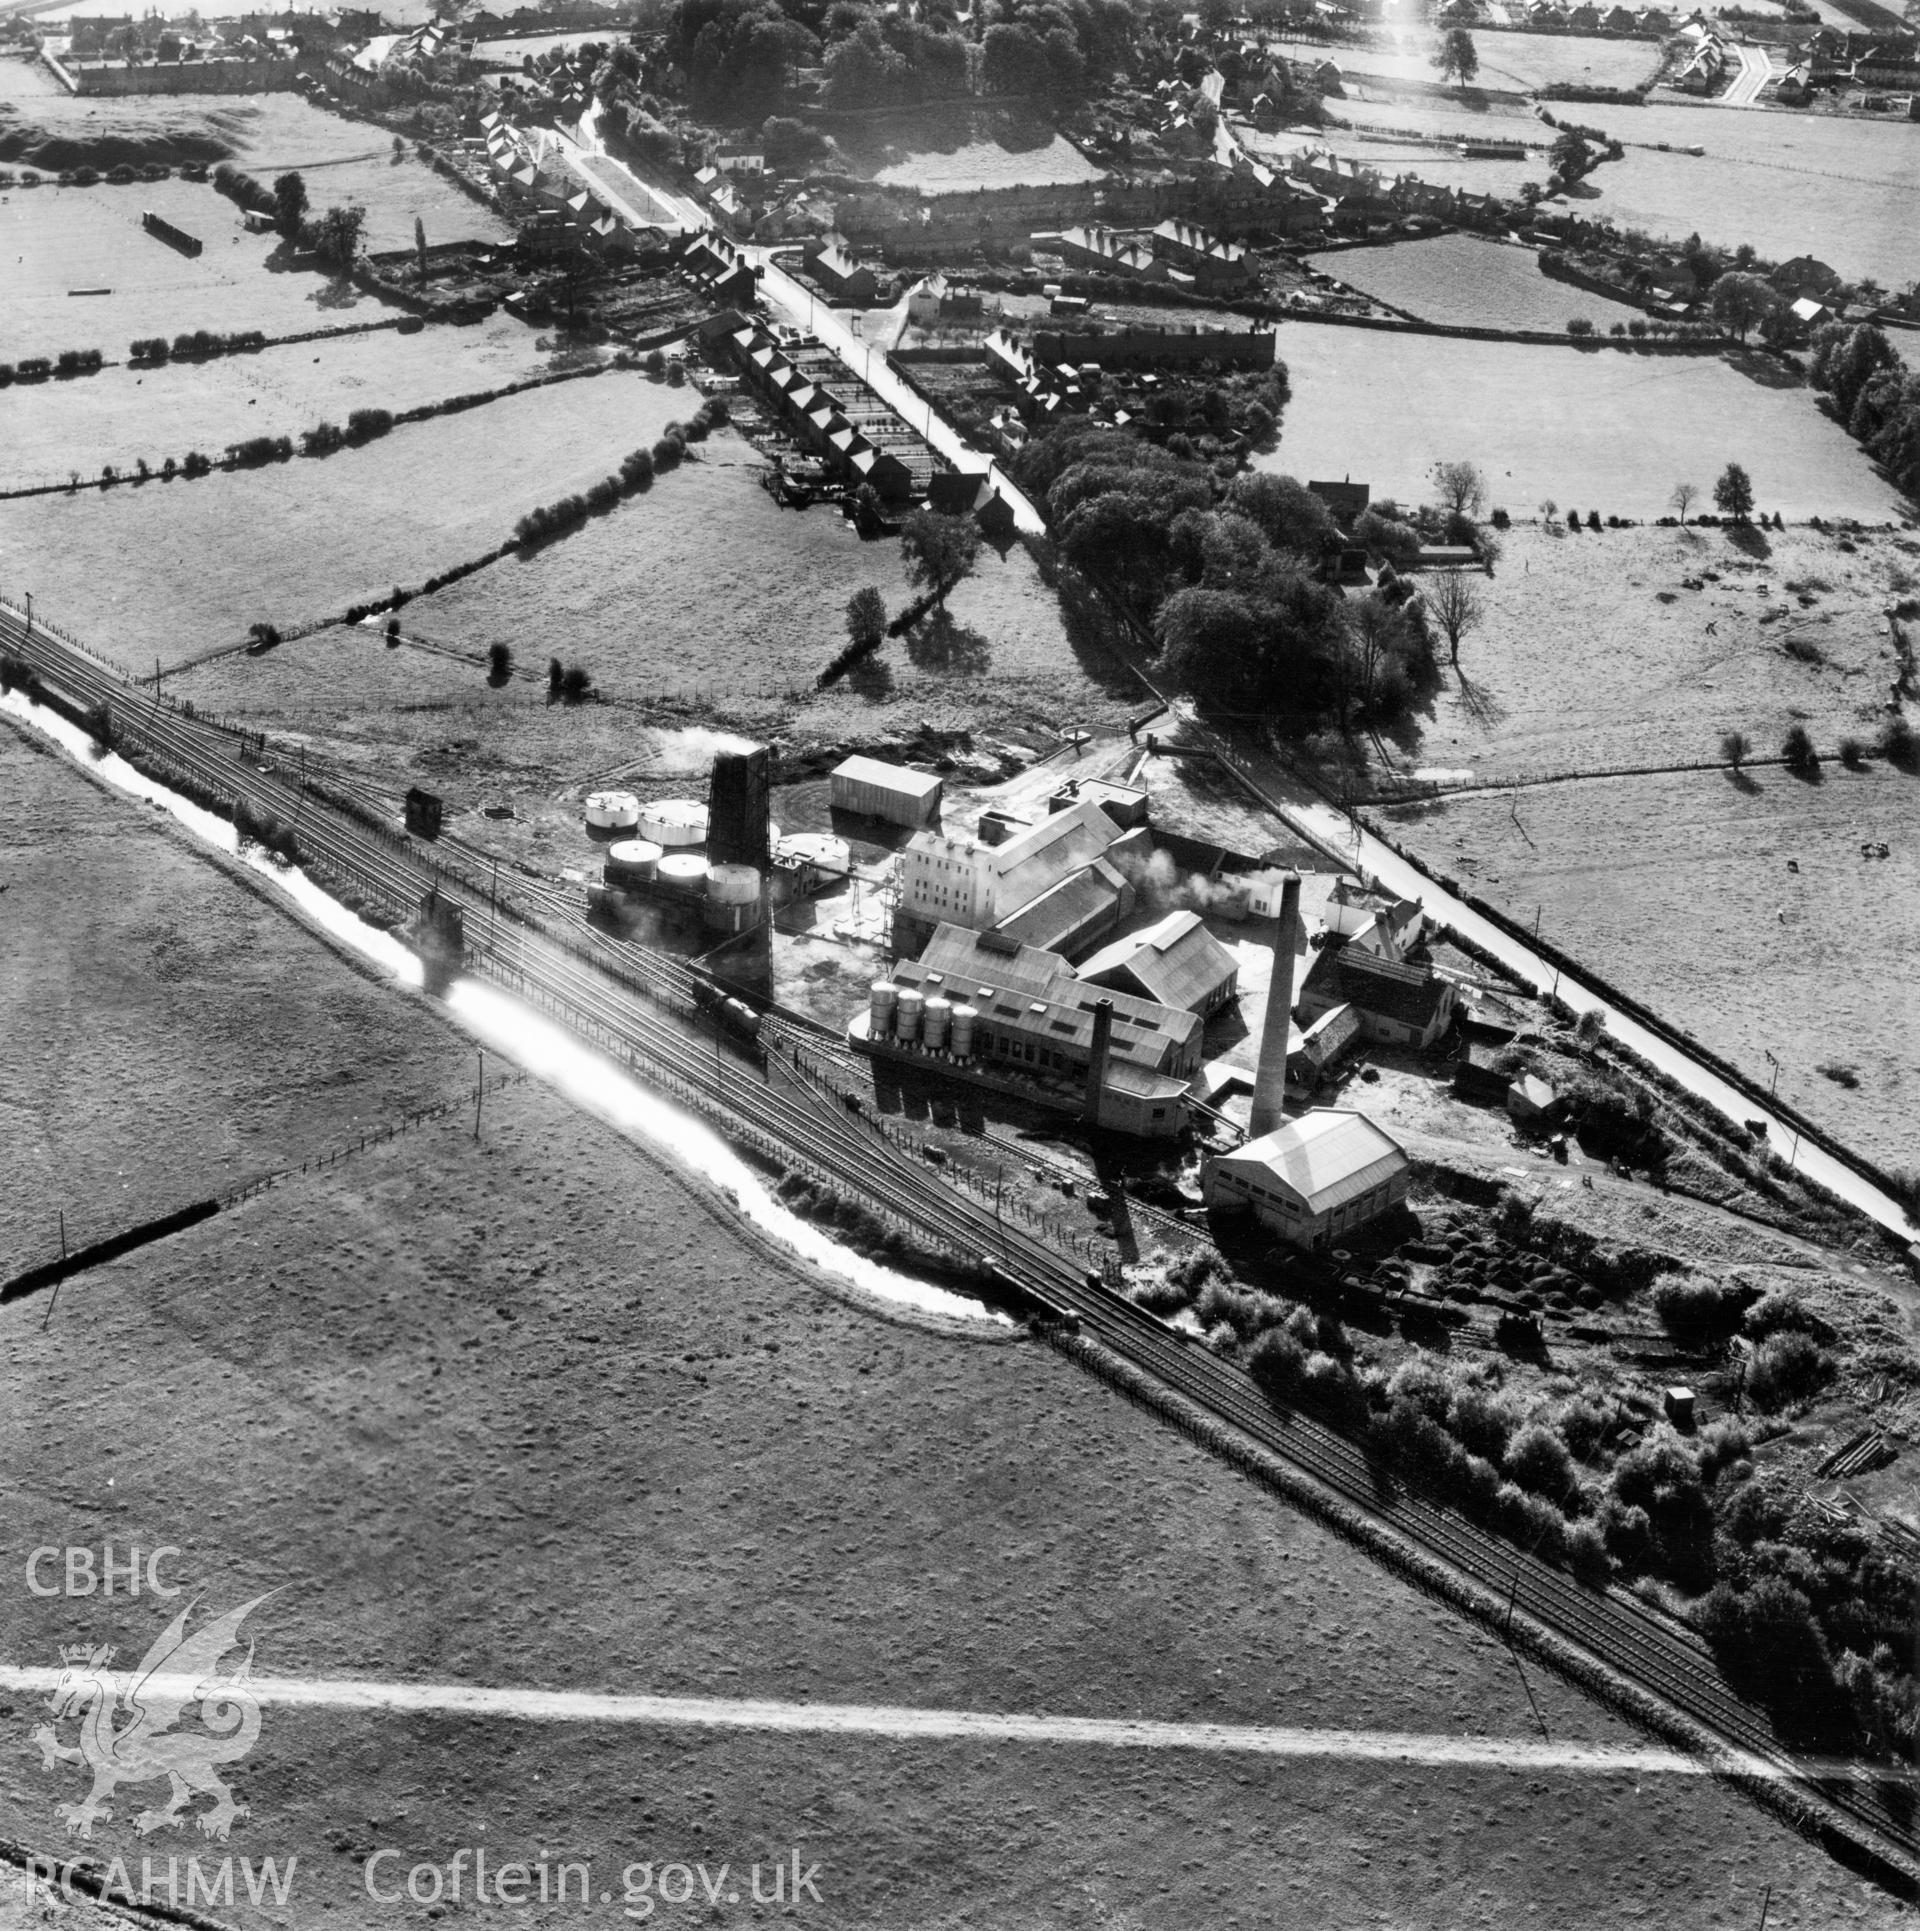 View of the Synthite Ltd. works near Mold. Oblique aerial photograph, 5?" cut roll film.